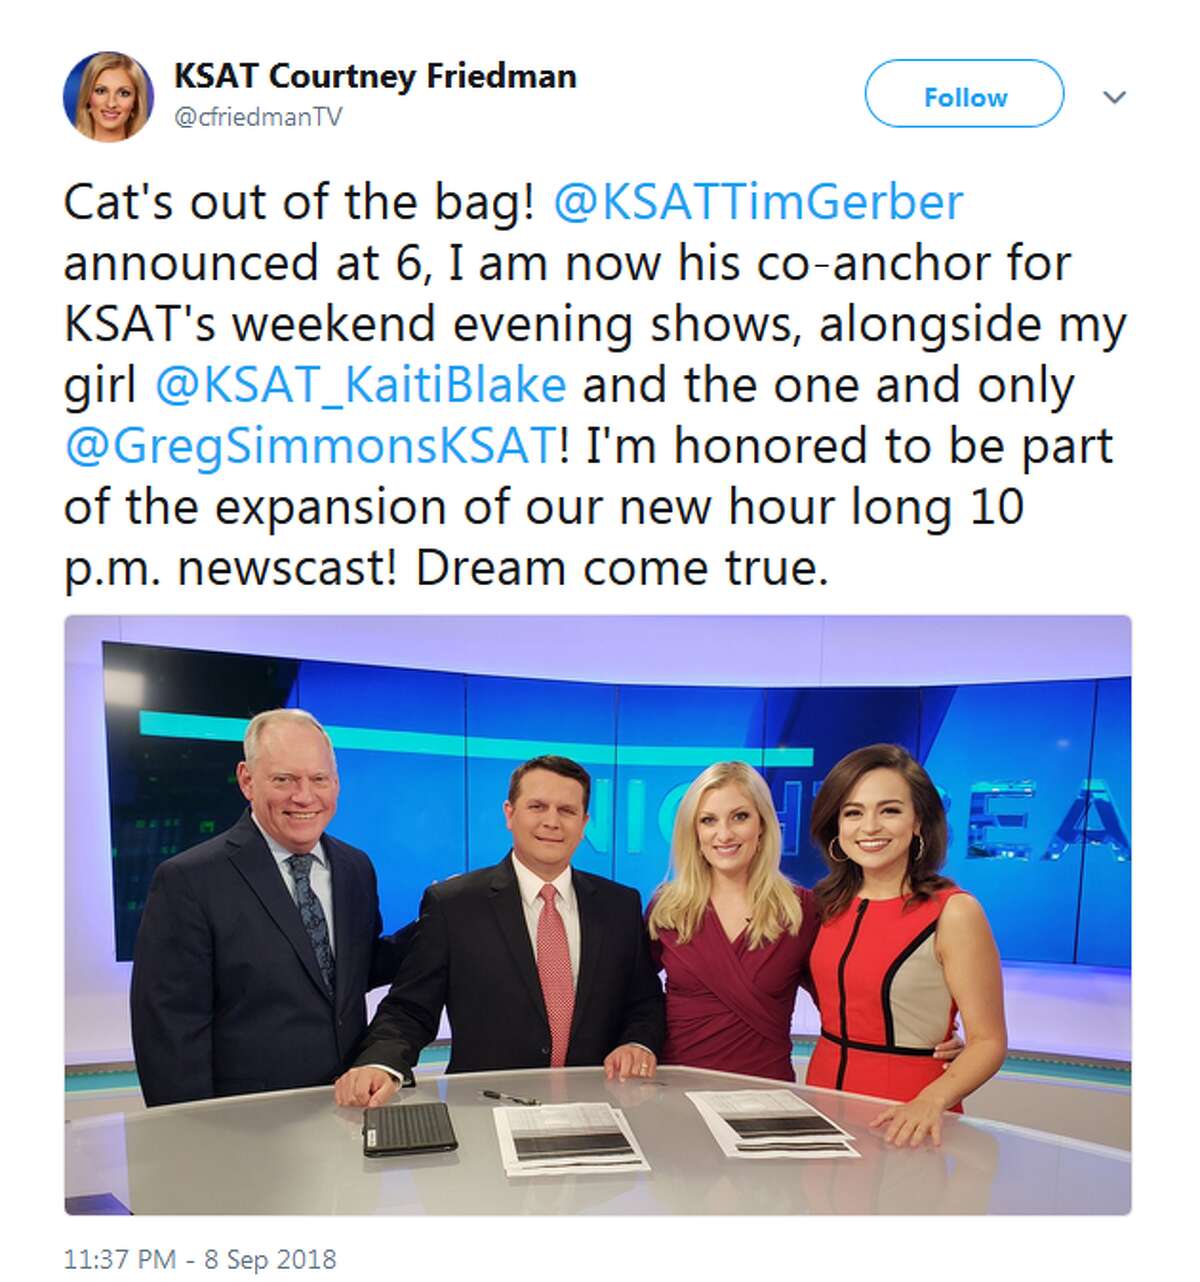 KSAT employees also announced changes for their station. Reporter Courtney Friedman shared that she would be joining Tim Gerber at the anchor desk for 10 p.m. newscasts on weekends. Friedman wrote on Twitter that she was "honored."